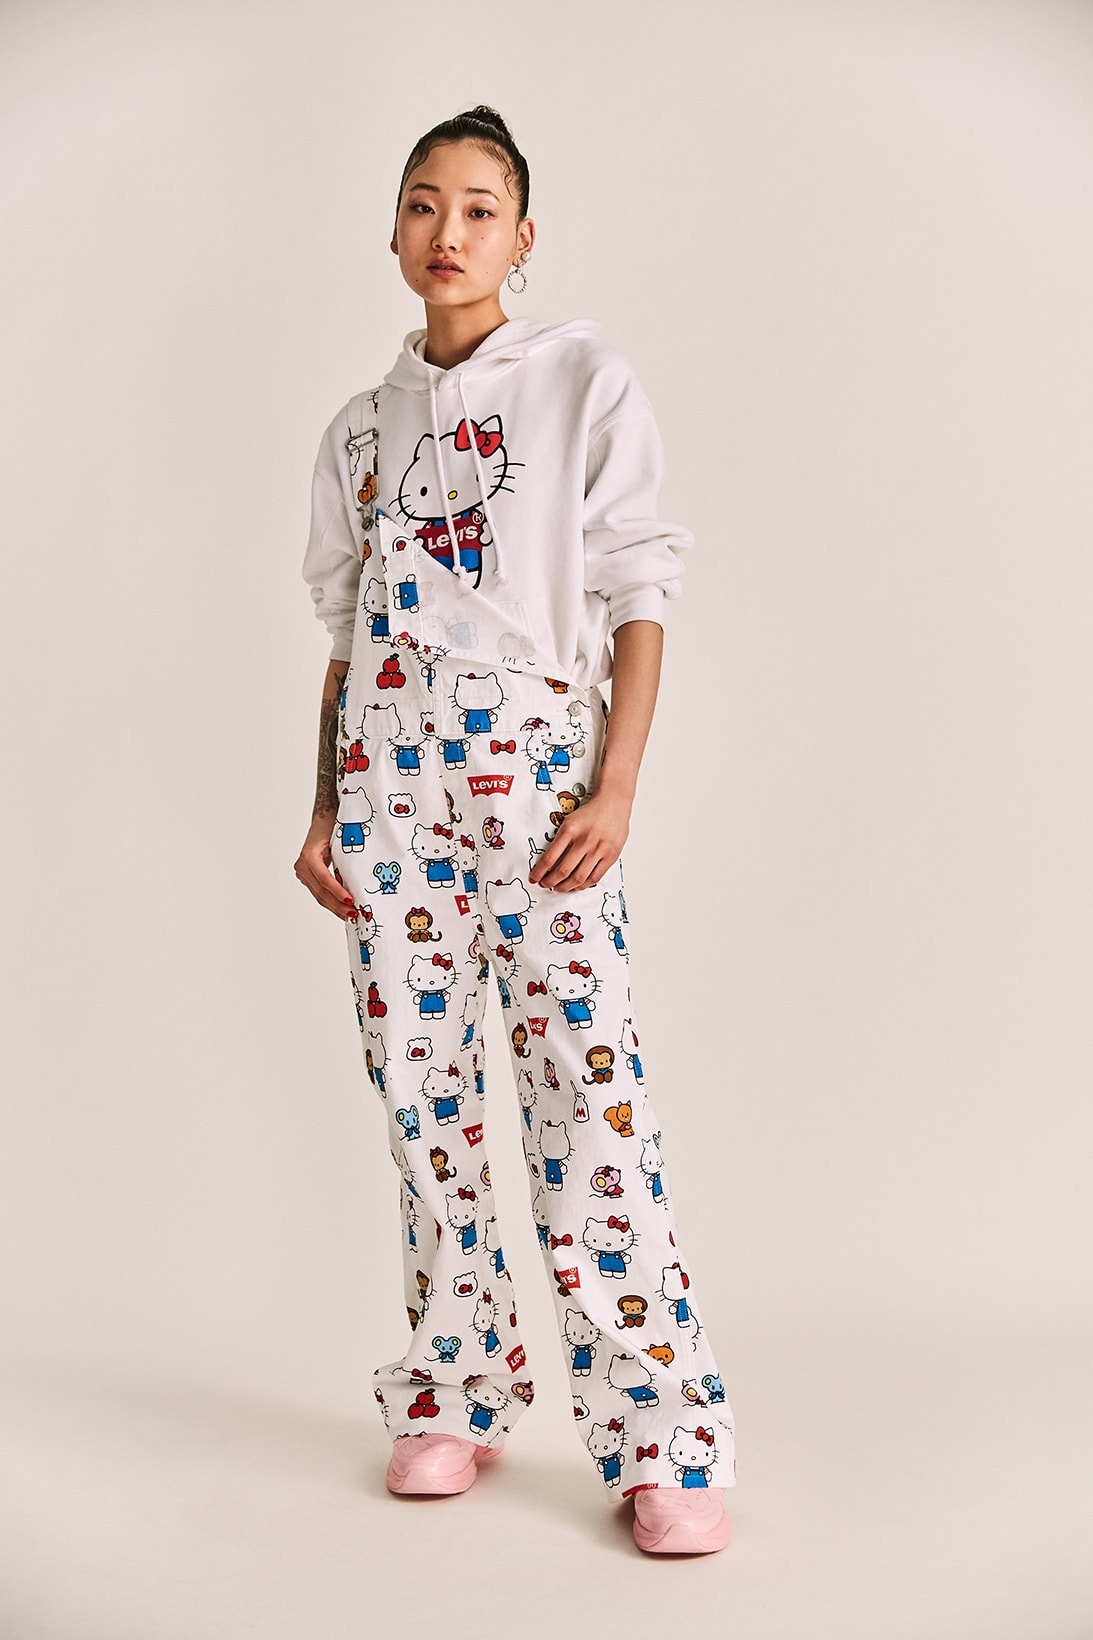 levis hello kitty anniversary collaboration collection womens girls limited edition tshirts overalls hoodies denim jackets jeans bags